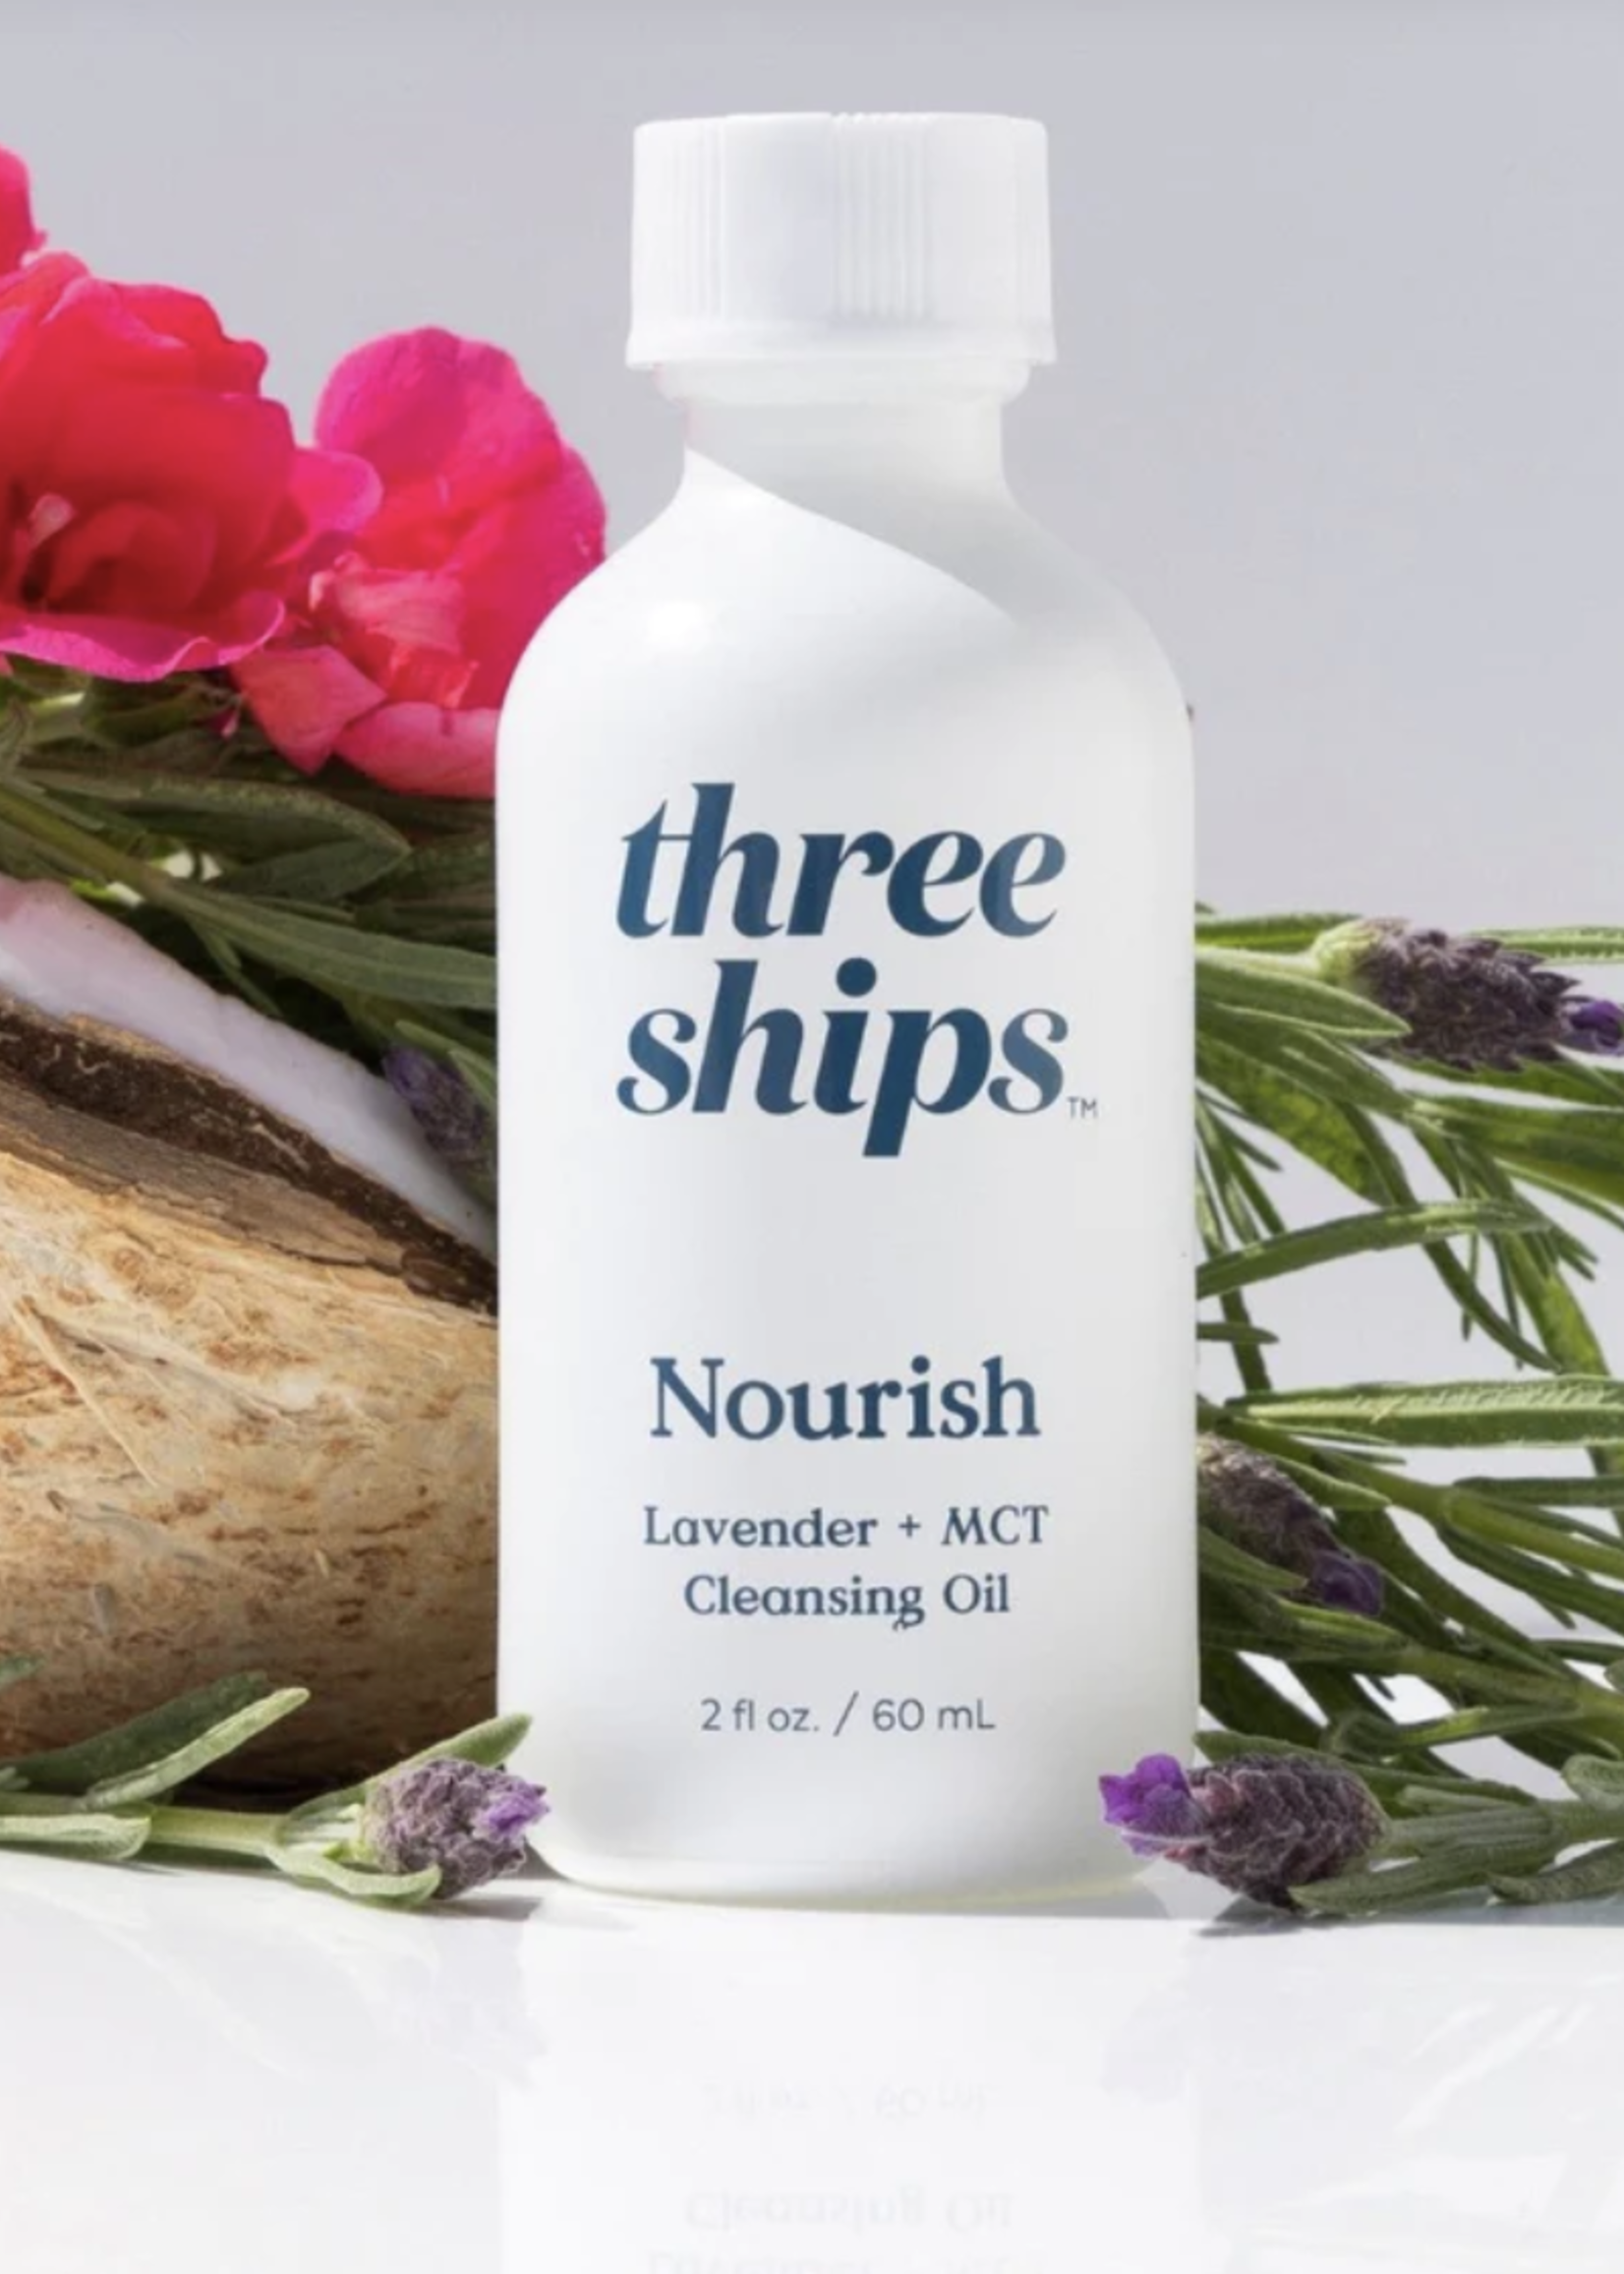 Three Ships Beauty Nourish | Lavender + MCT Cleansing Oil